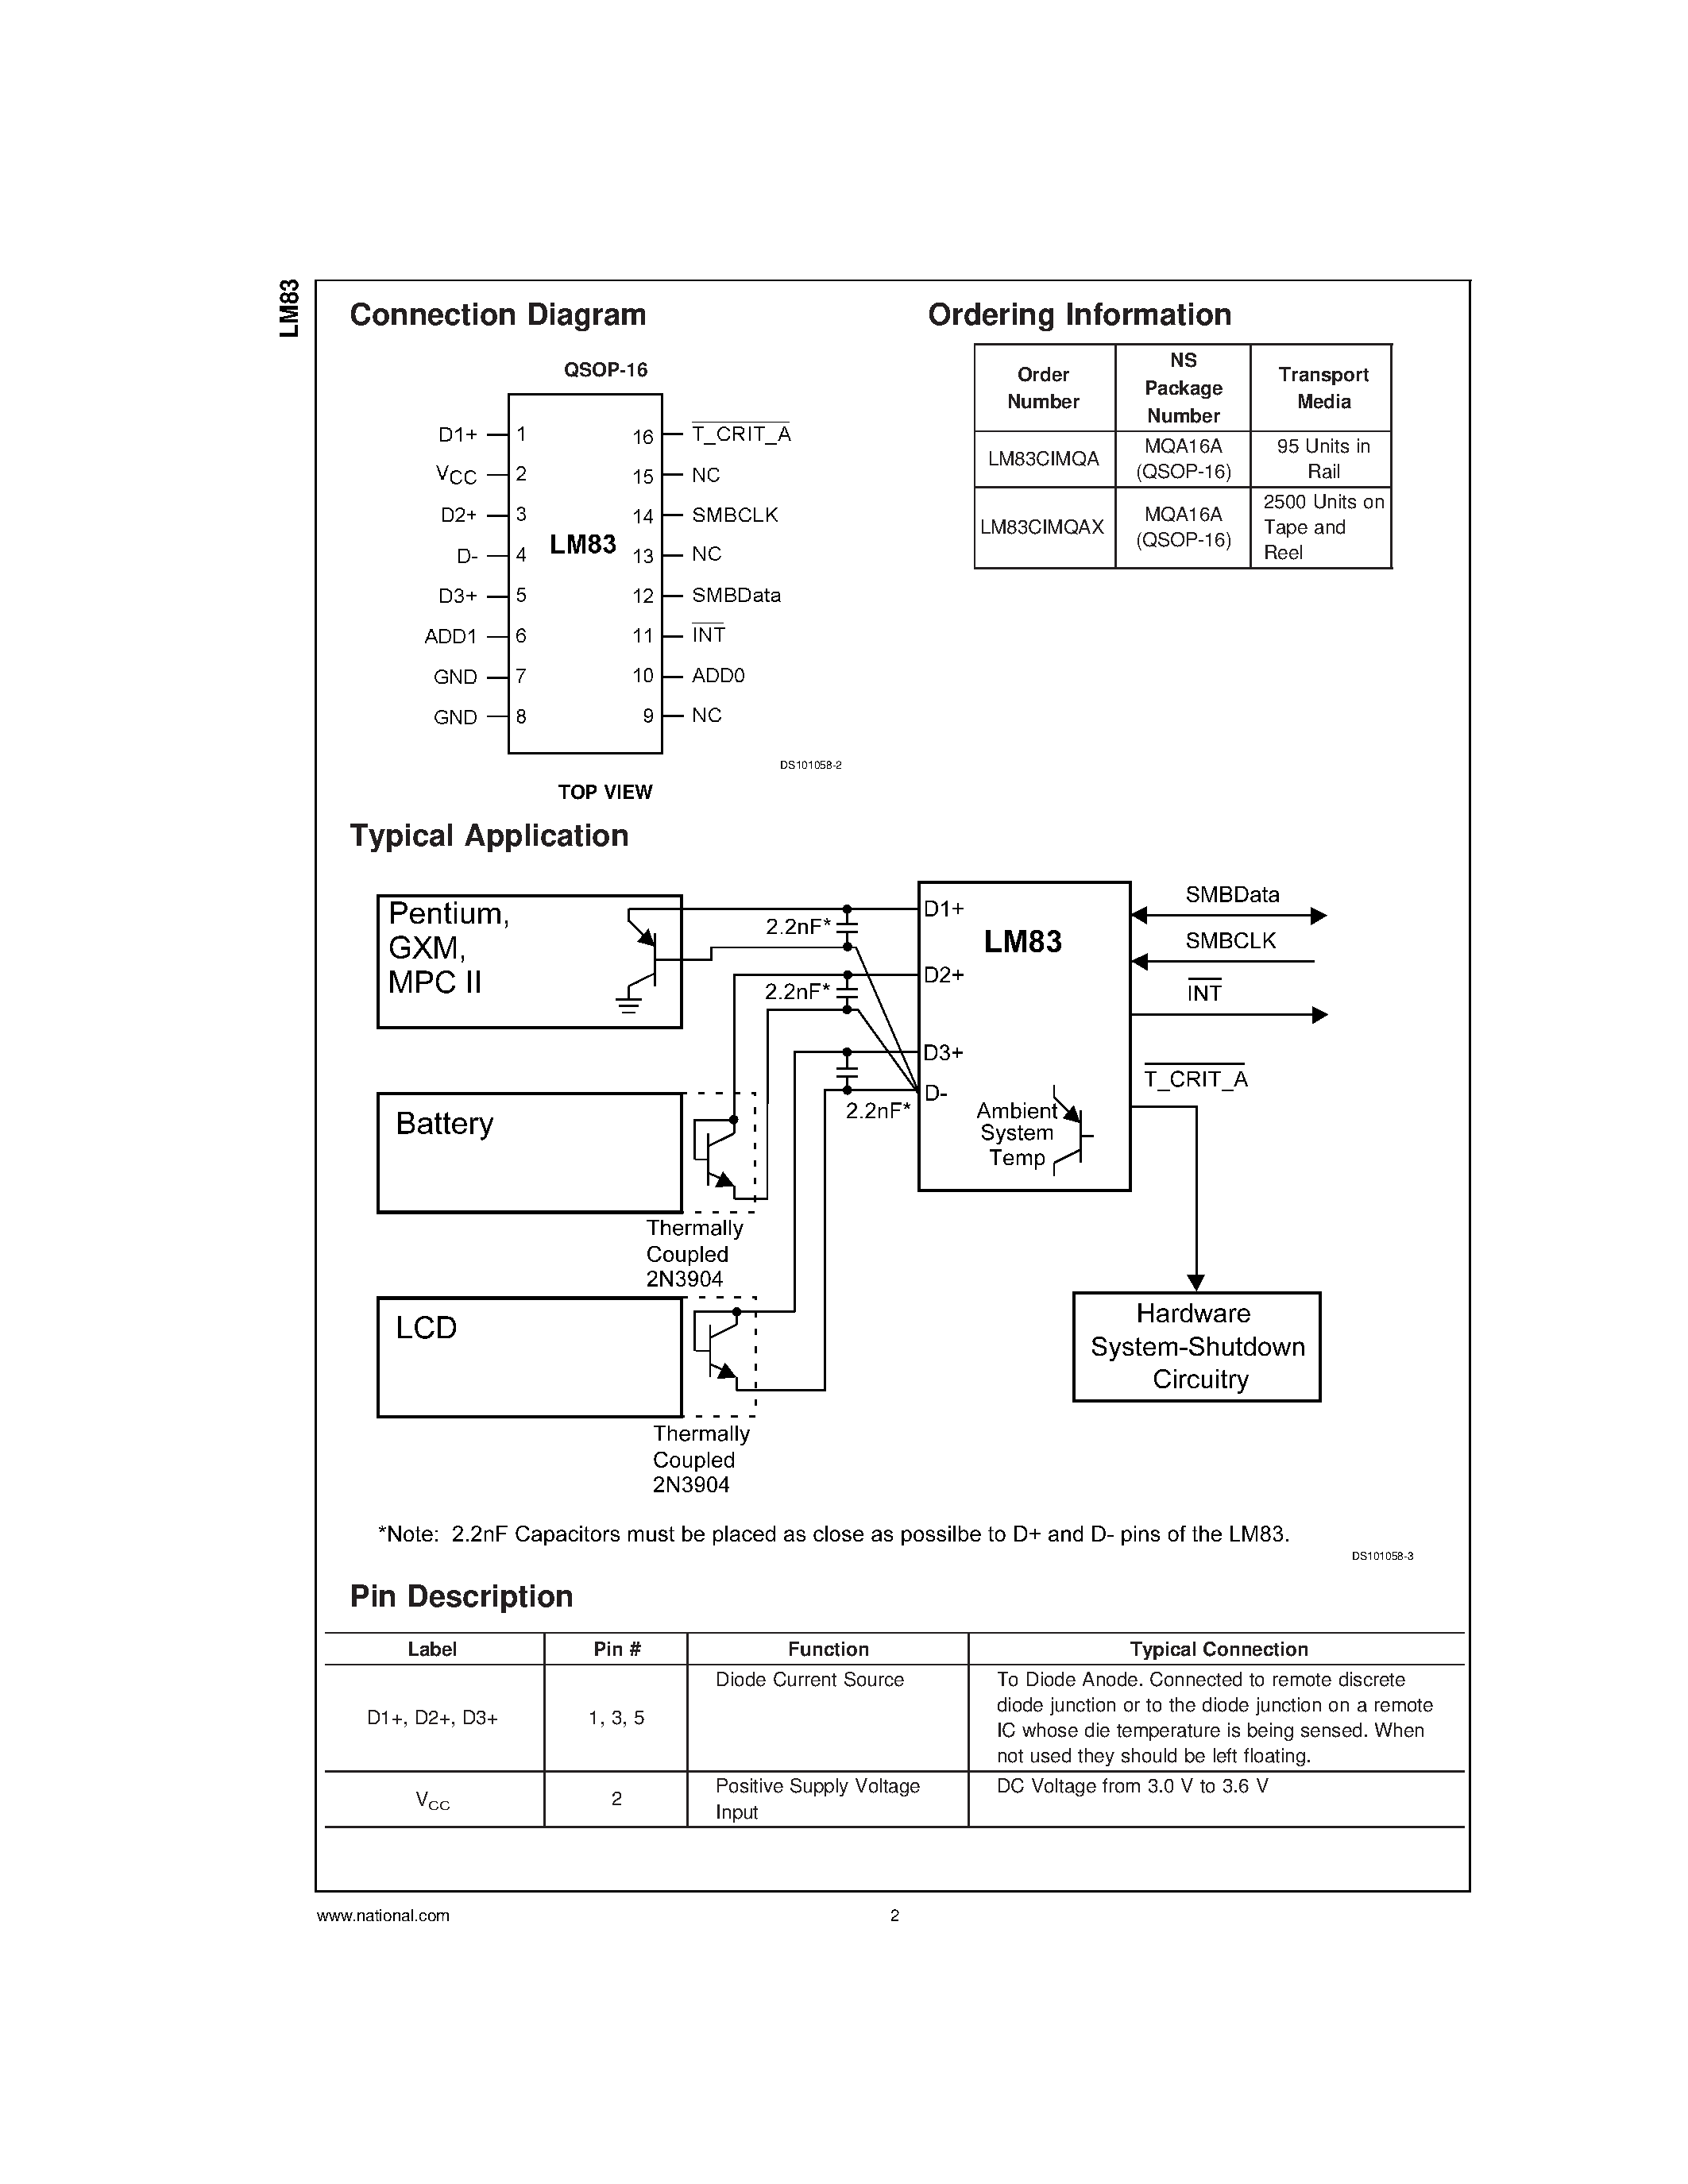 Datasheet LM83CIMQA - Triple-Diode Input and Local Digital Temperature Sensor with Two-Wire Interface page 2